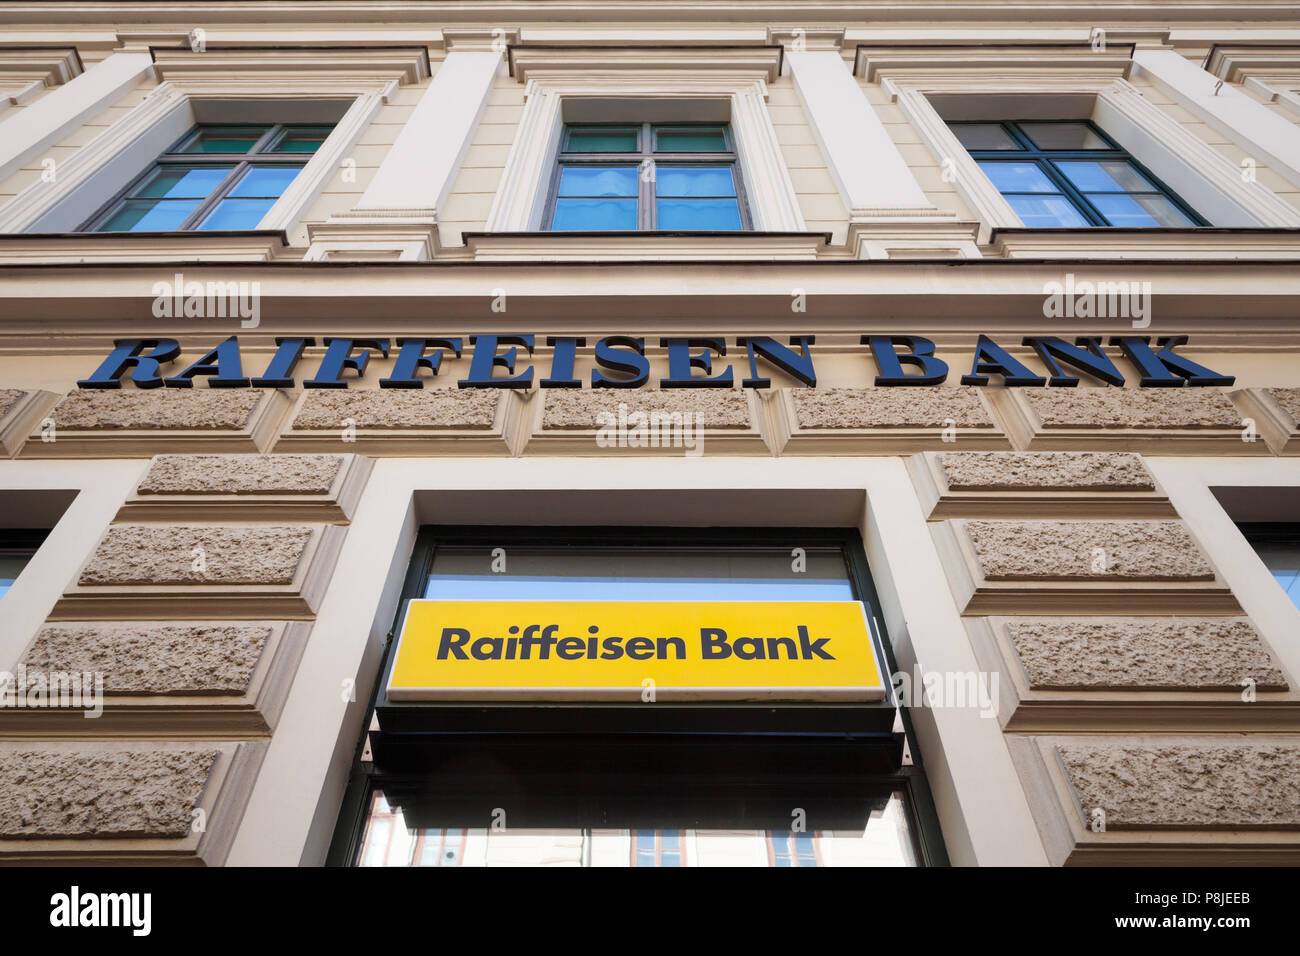 SZEGED, HUNGARY, JULY 3, 2018: Raiffeisen logo on their main bank in the center of Szeged. Raiffeisen is an Austrian bank, massively investing in Cent Stock Photo